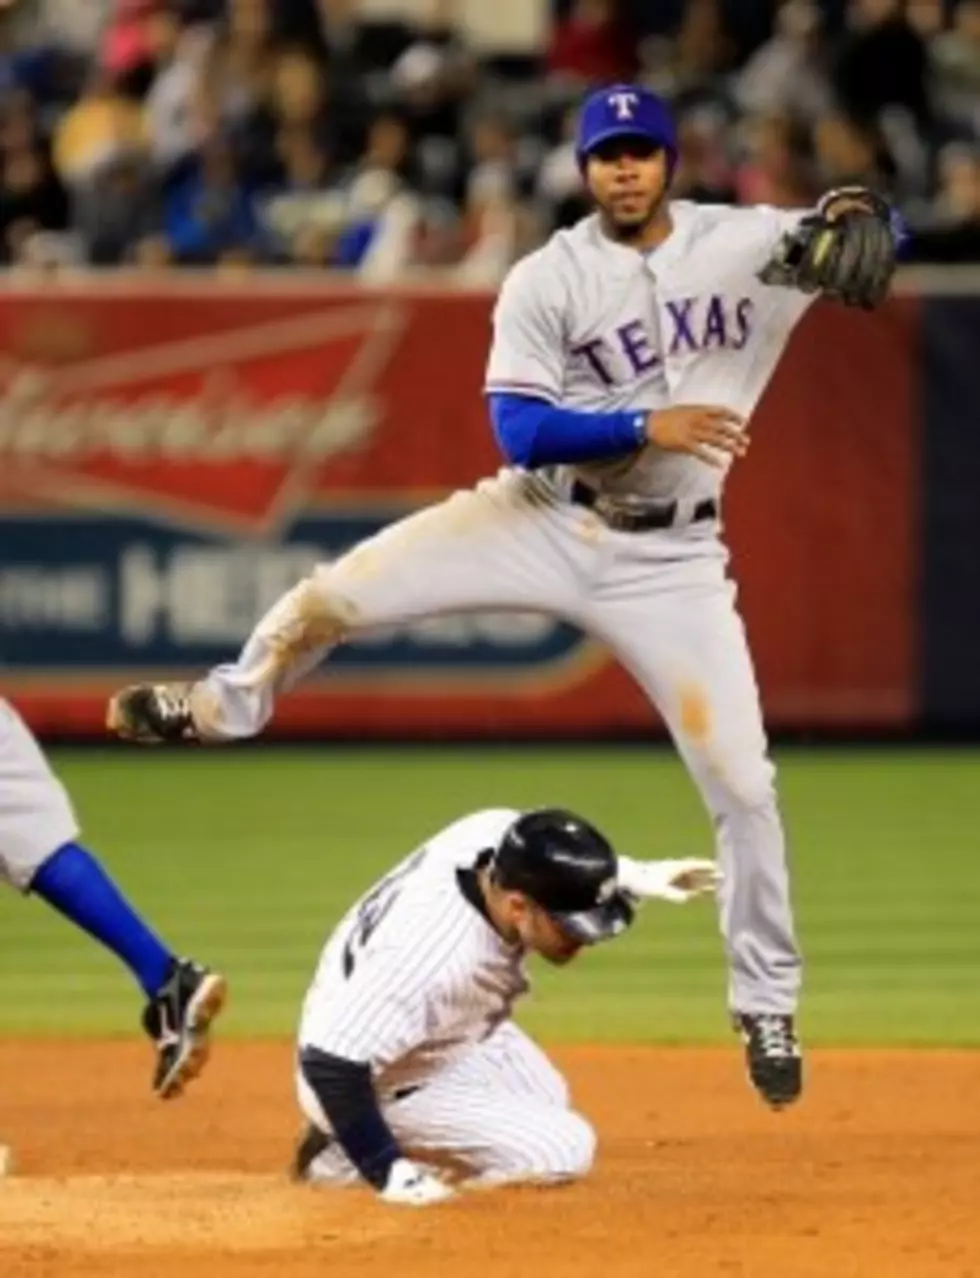 Texas Rangers Turn Six Double Plays in Win Over New York Yankees